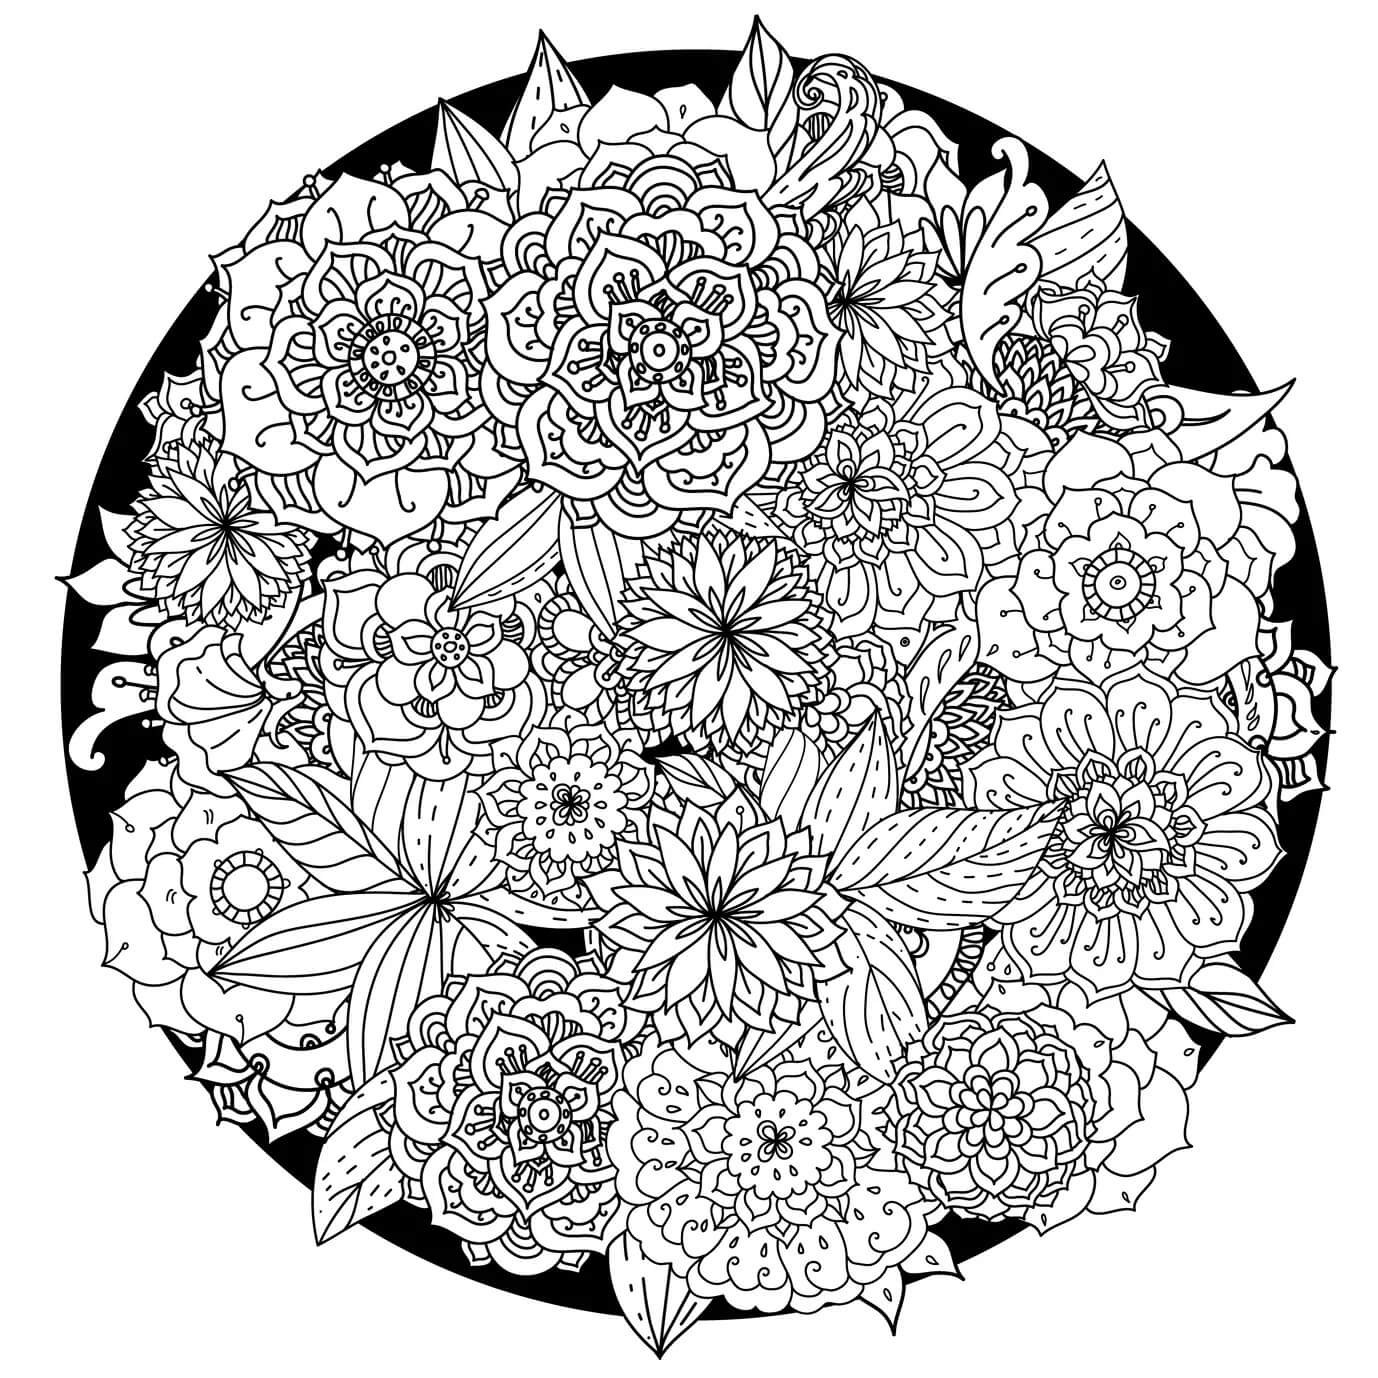 coloring pages for stress relief | stress relieving coloring pages pdf | coloring pages for adults anxiety